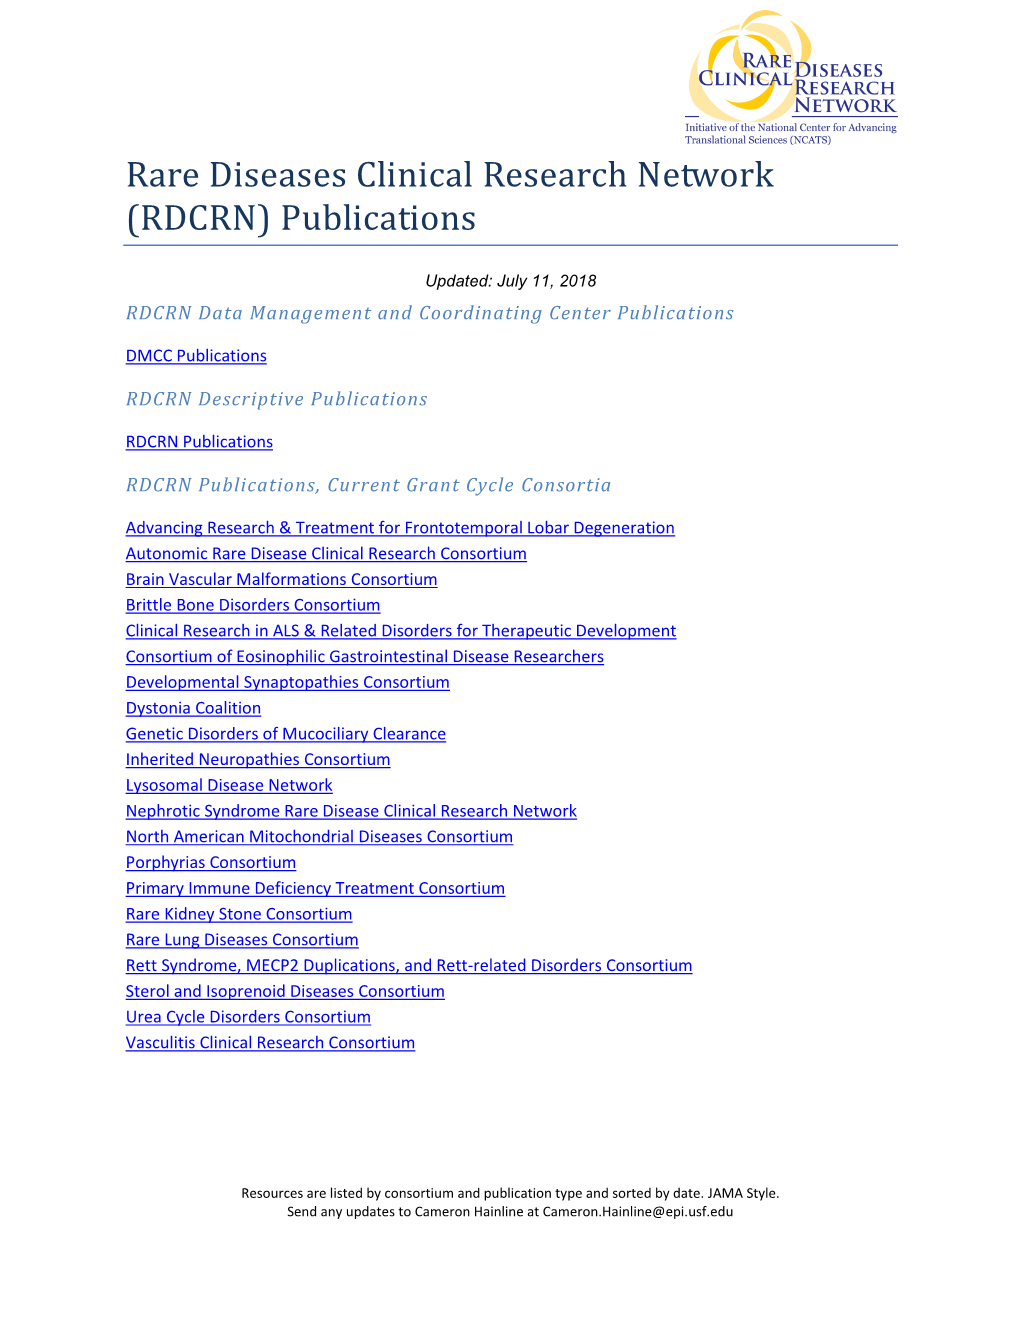 Rare Diseases Clinical Research Network (RDCRN) Publications